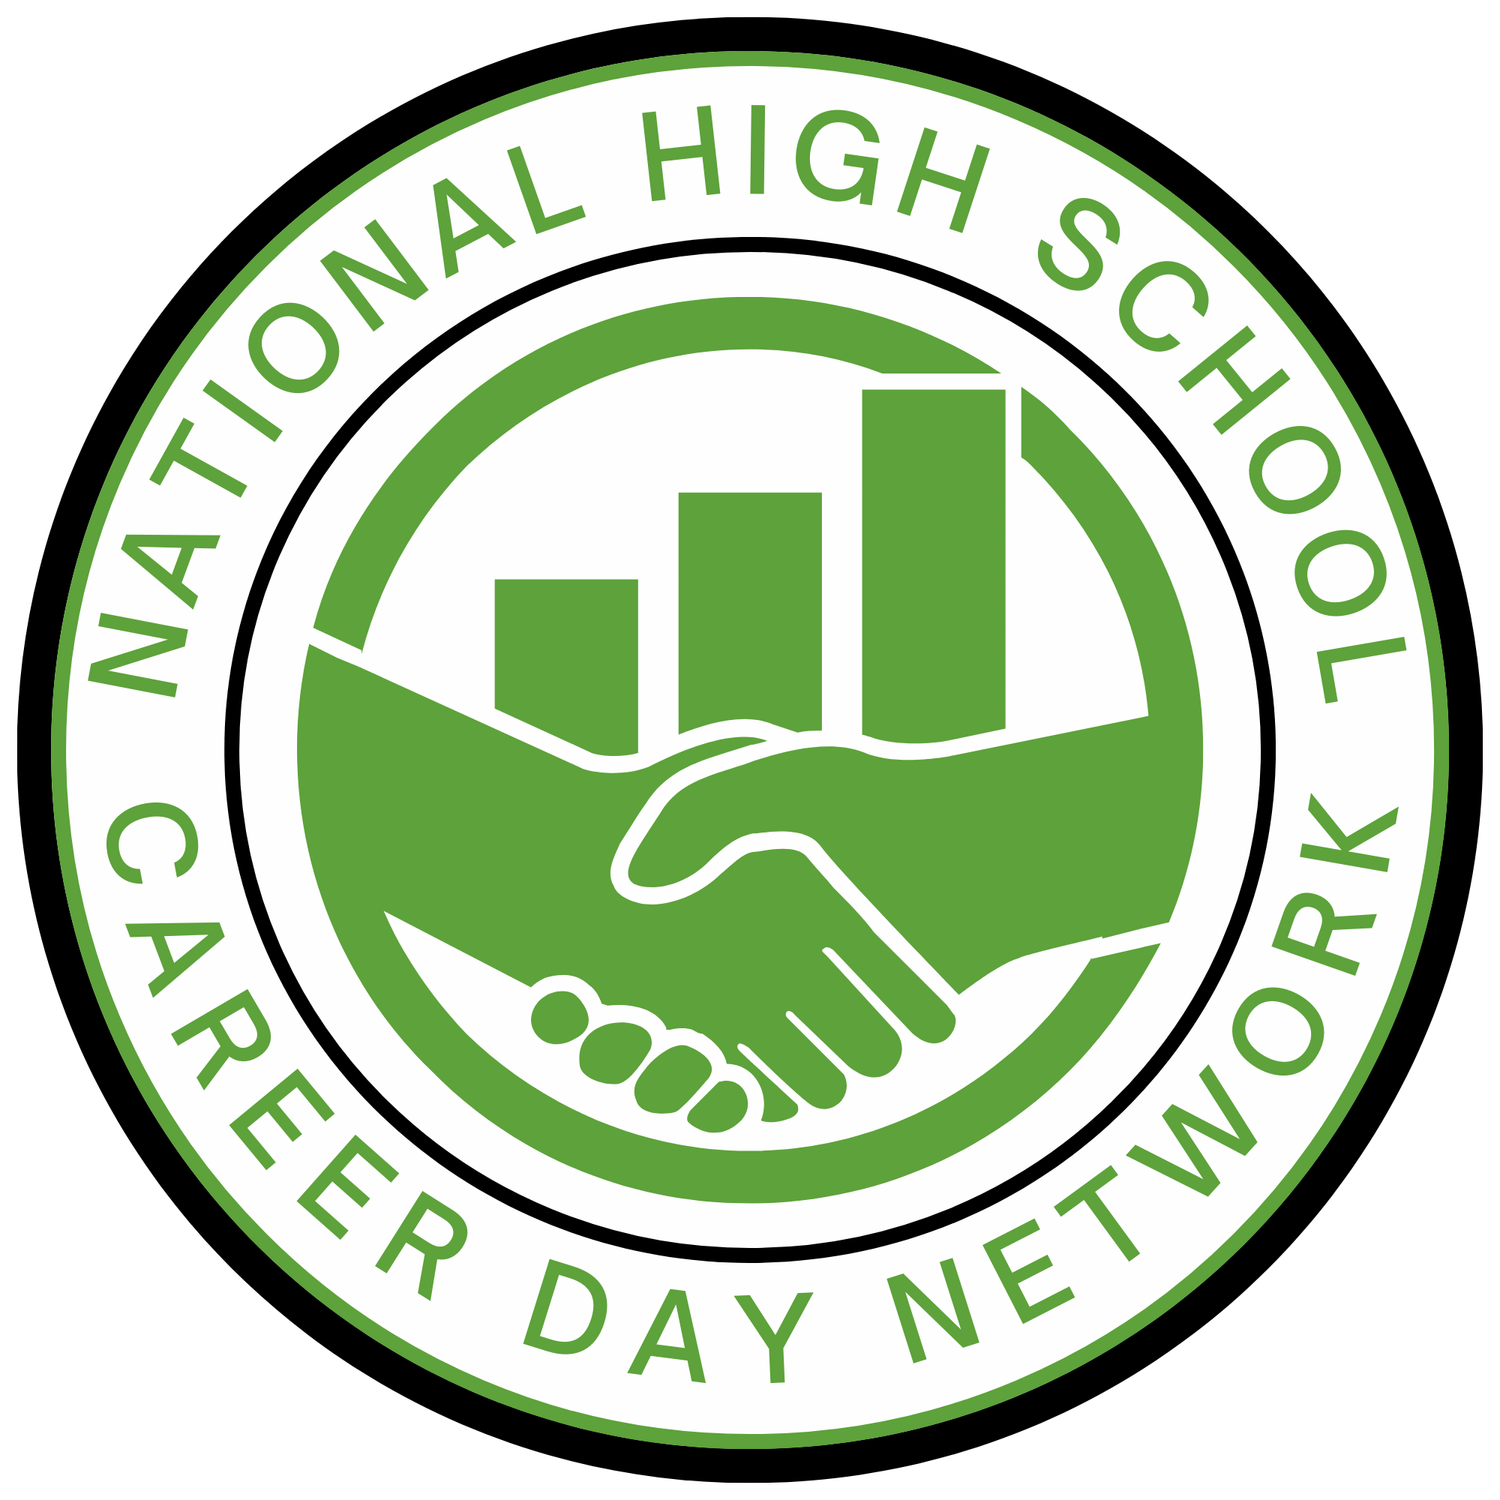 National High School Career Day Network